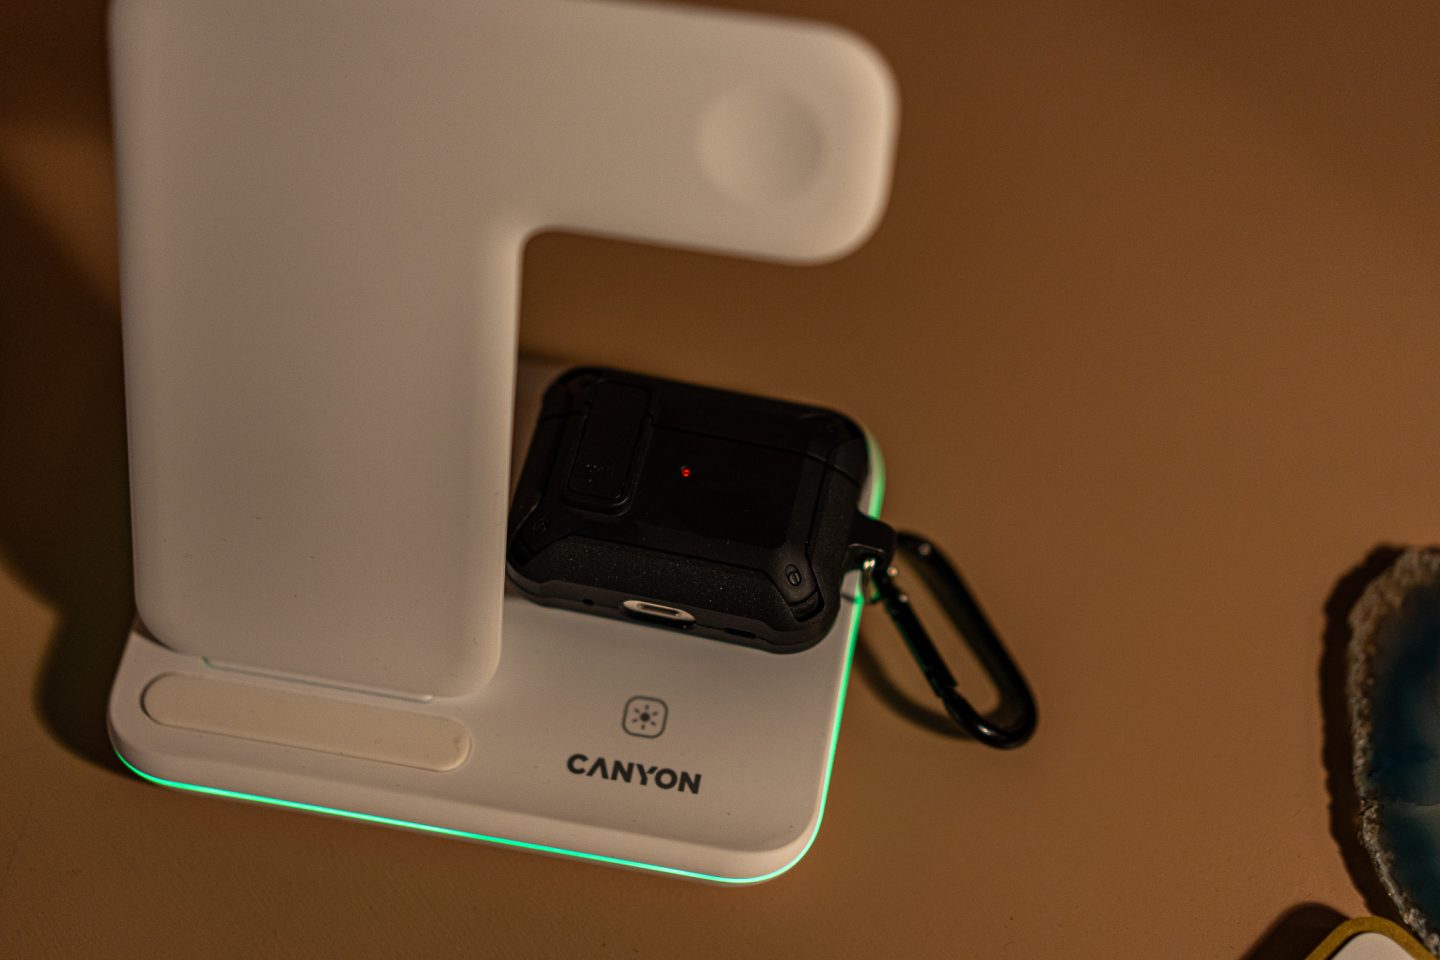 Canyon_3 in 1_charging_station-light